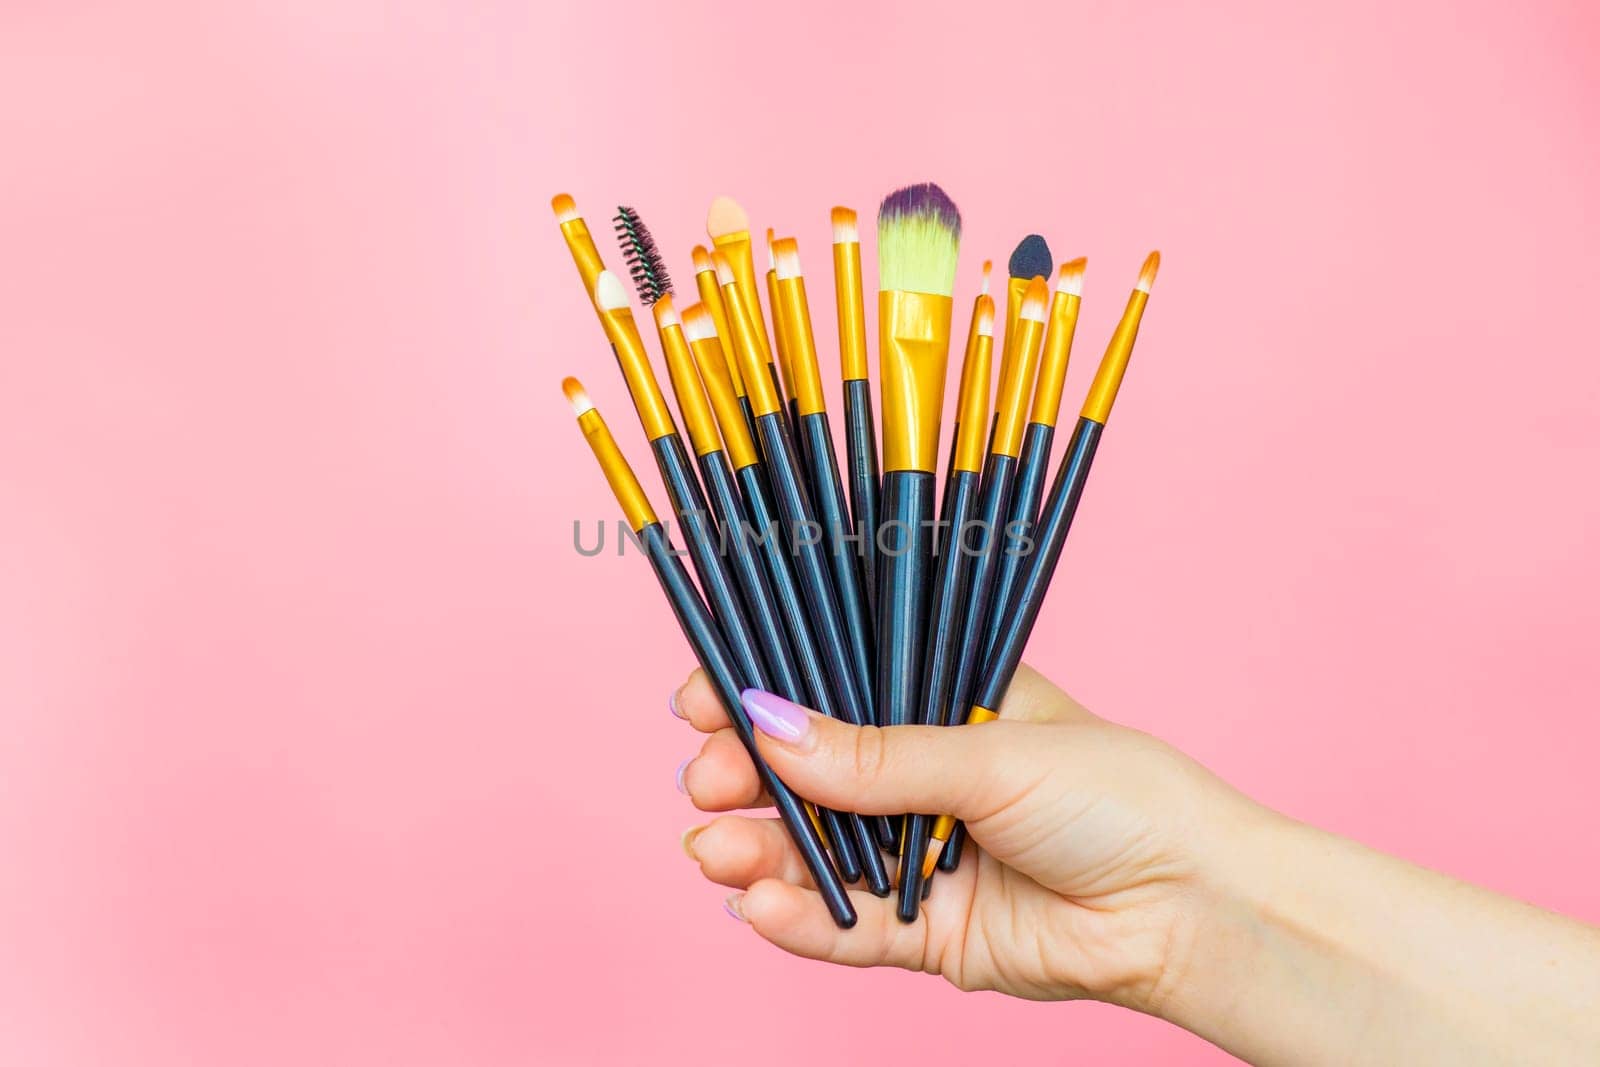 hand holding 15 Makeup Brushes Set, on pink background. beauty cosmetic product layout. woman Stylish design background. Creative fashion concept. Cosmetics make-up collection. makeup artist tools